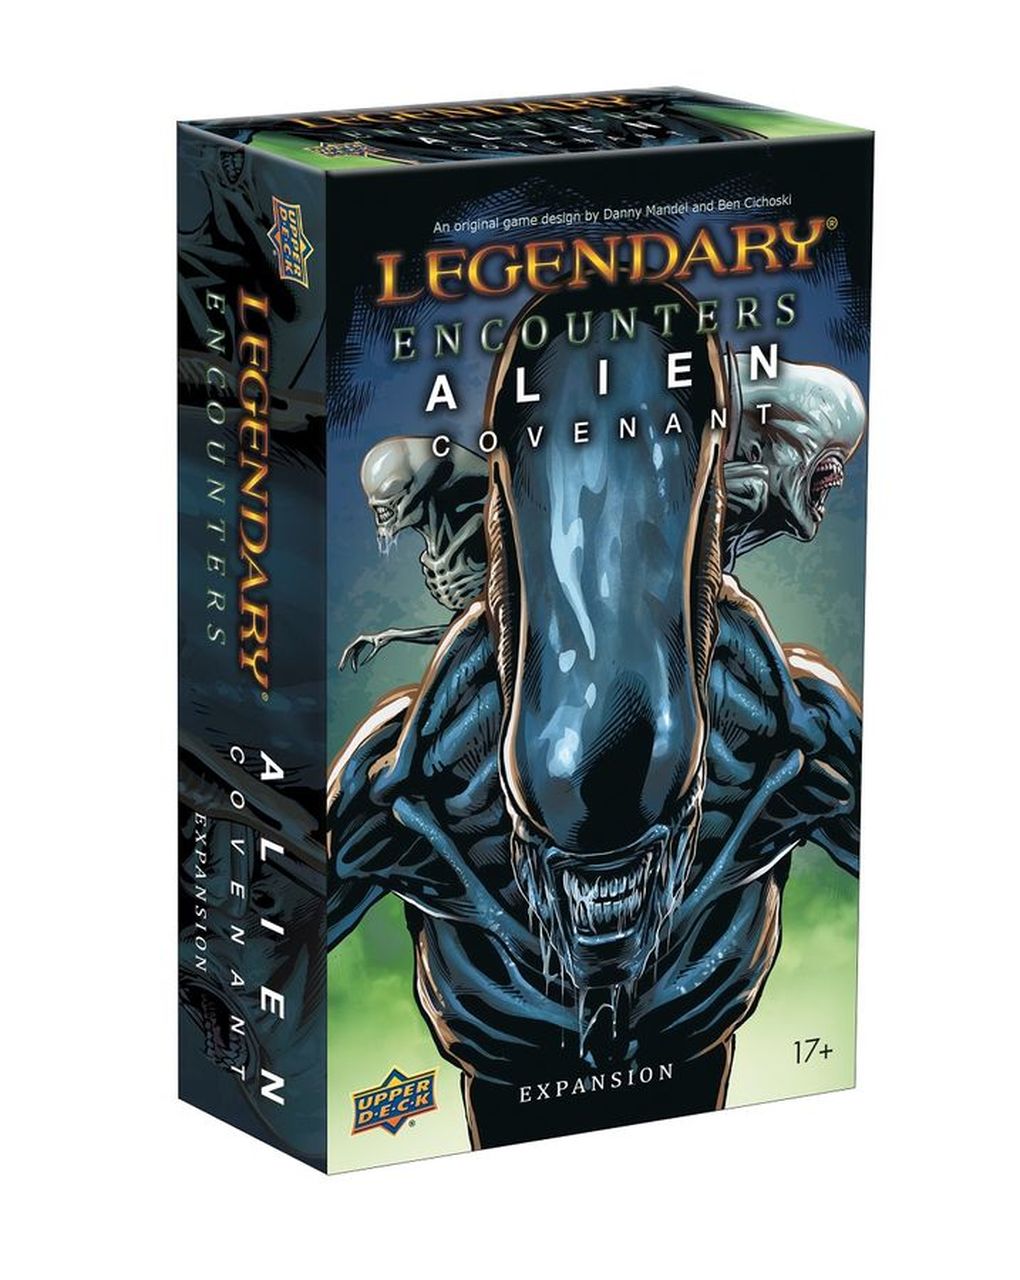 Legendary Encounters: Alien Covenant | All About Games